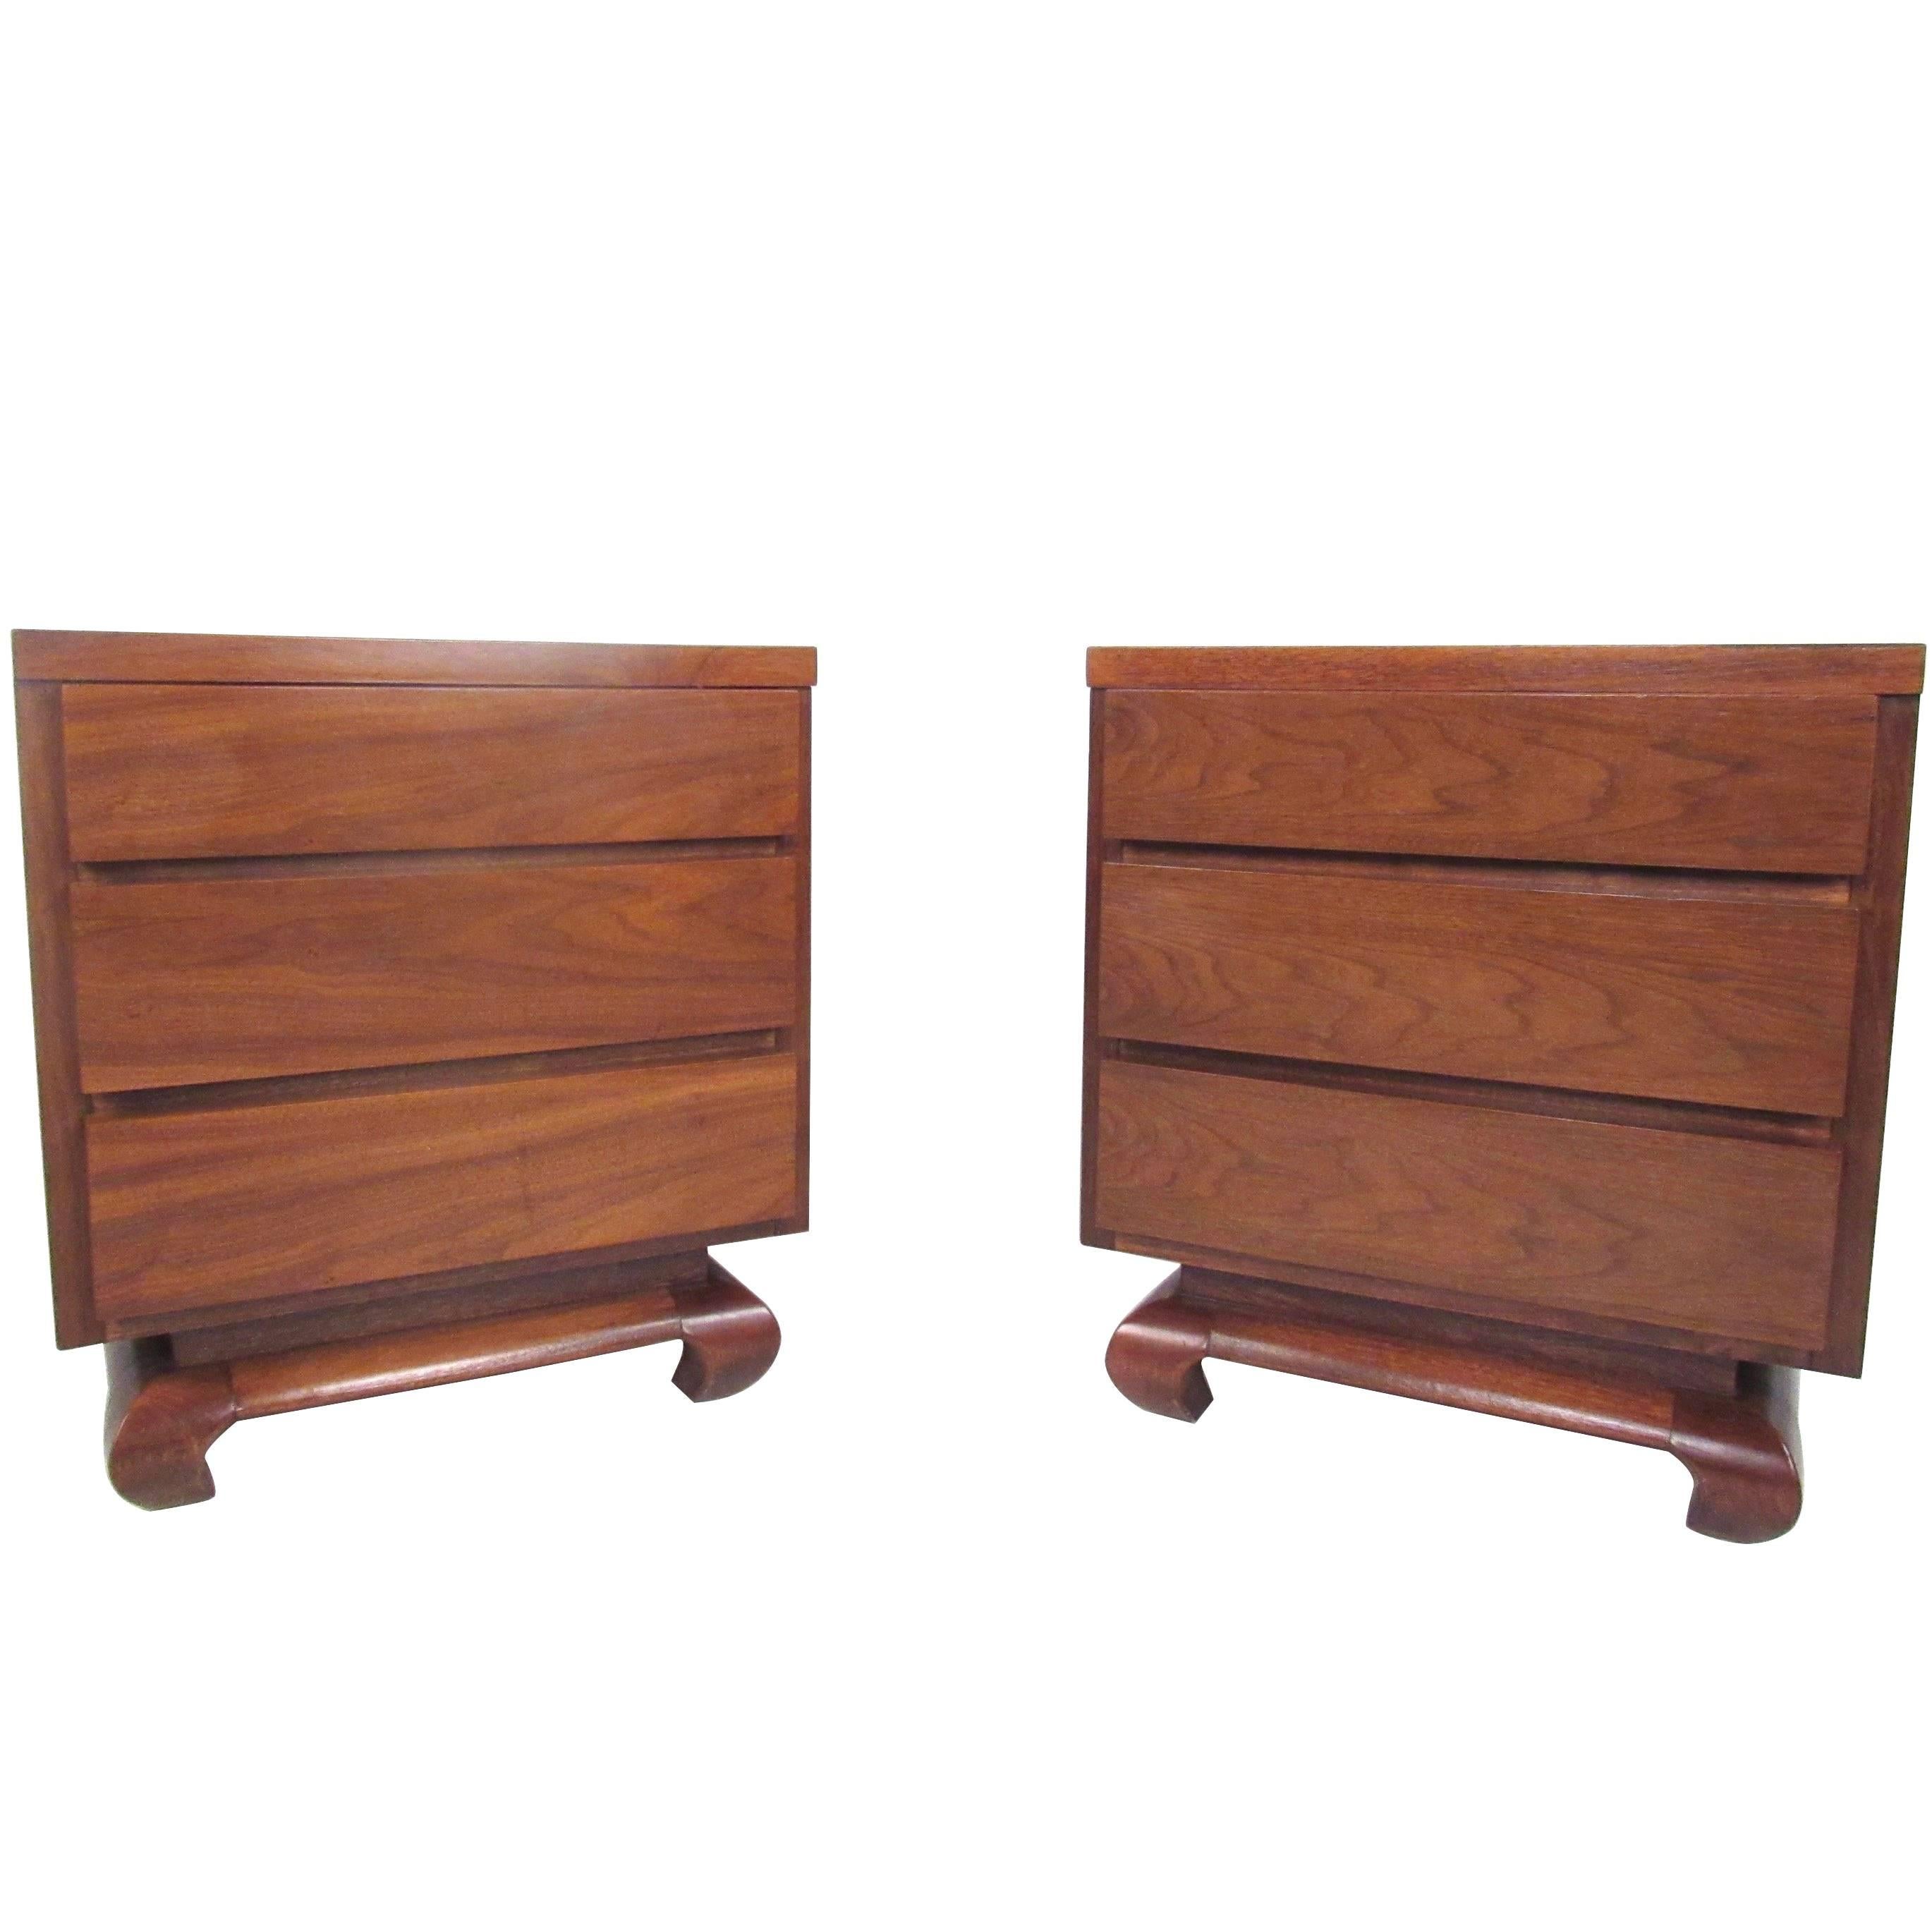 Pair of Mid-Century Three-Drawer Nightstands by American of Martinsville